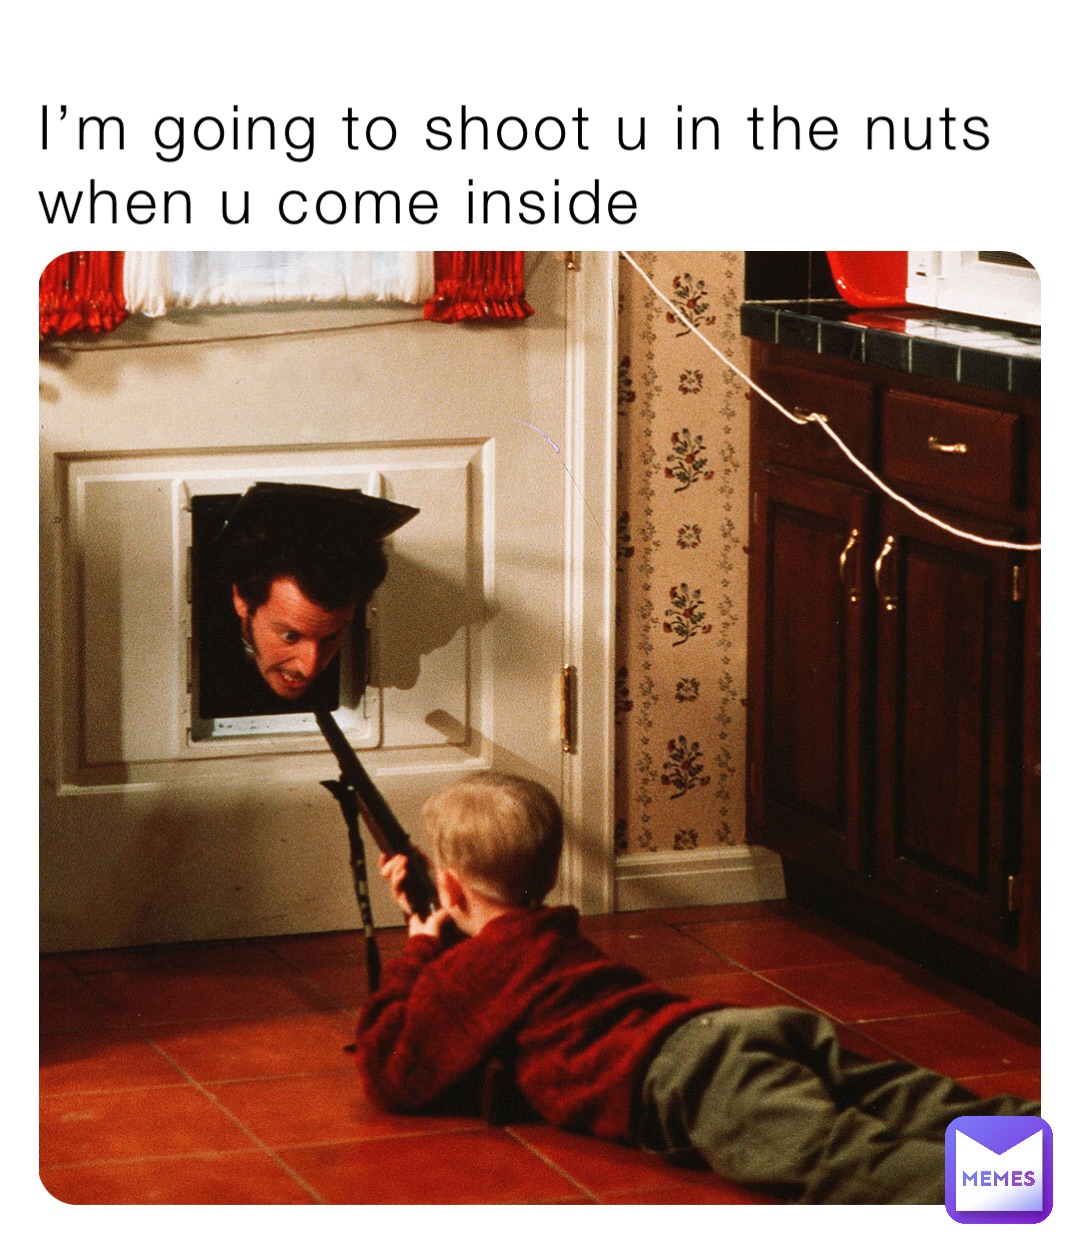 I’m going to shoot u in the nuts when u come inside